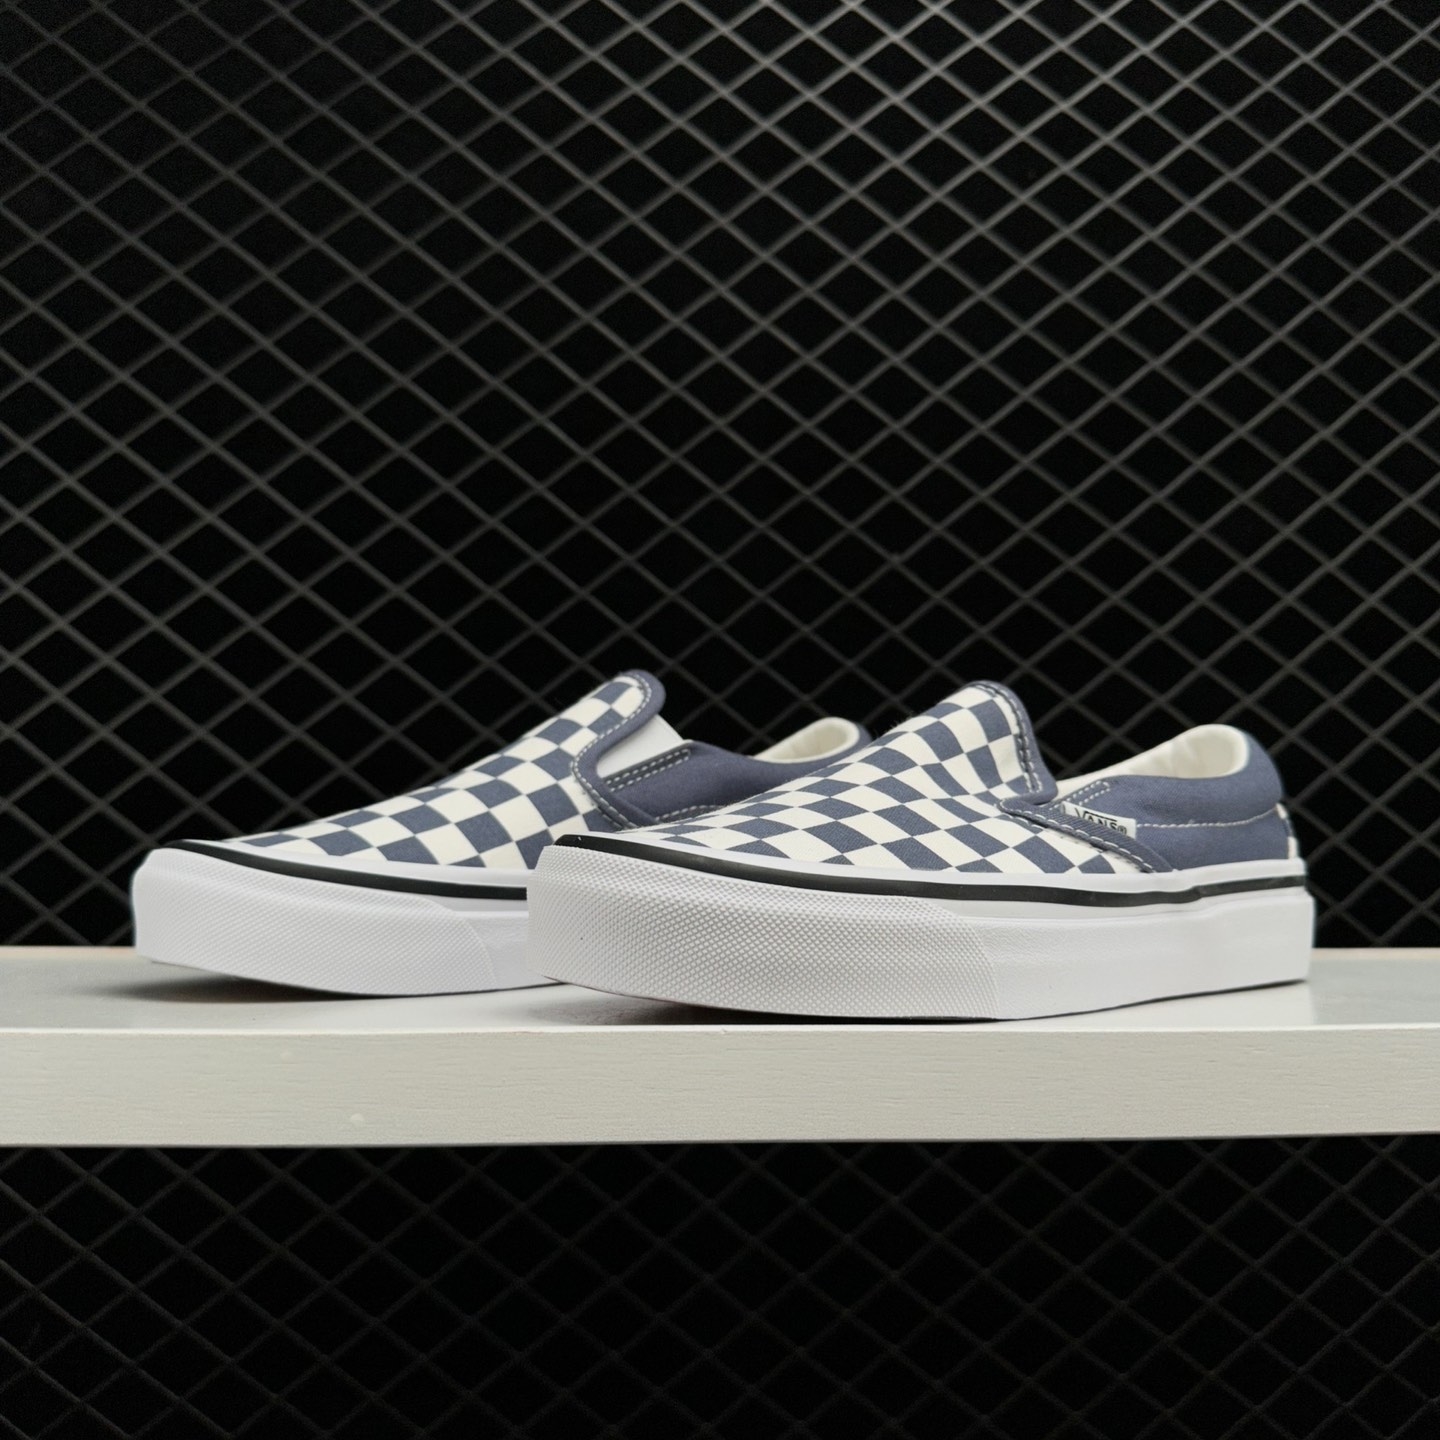 Vans Checkerboard Slip-On 'Blue White' VN0A7Q5DRV2 - Stylish and Comfortable Slip-On Shoes